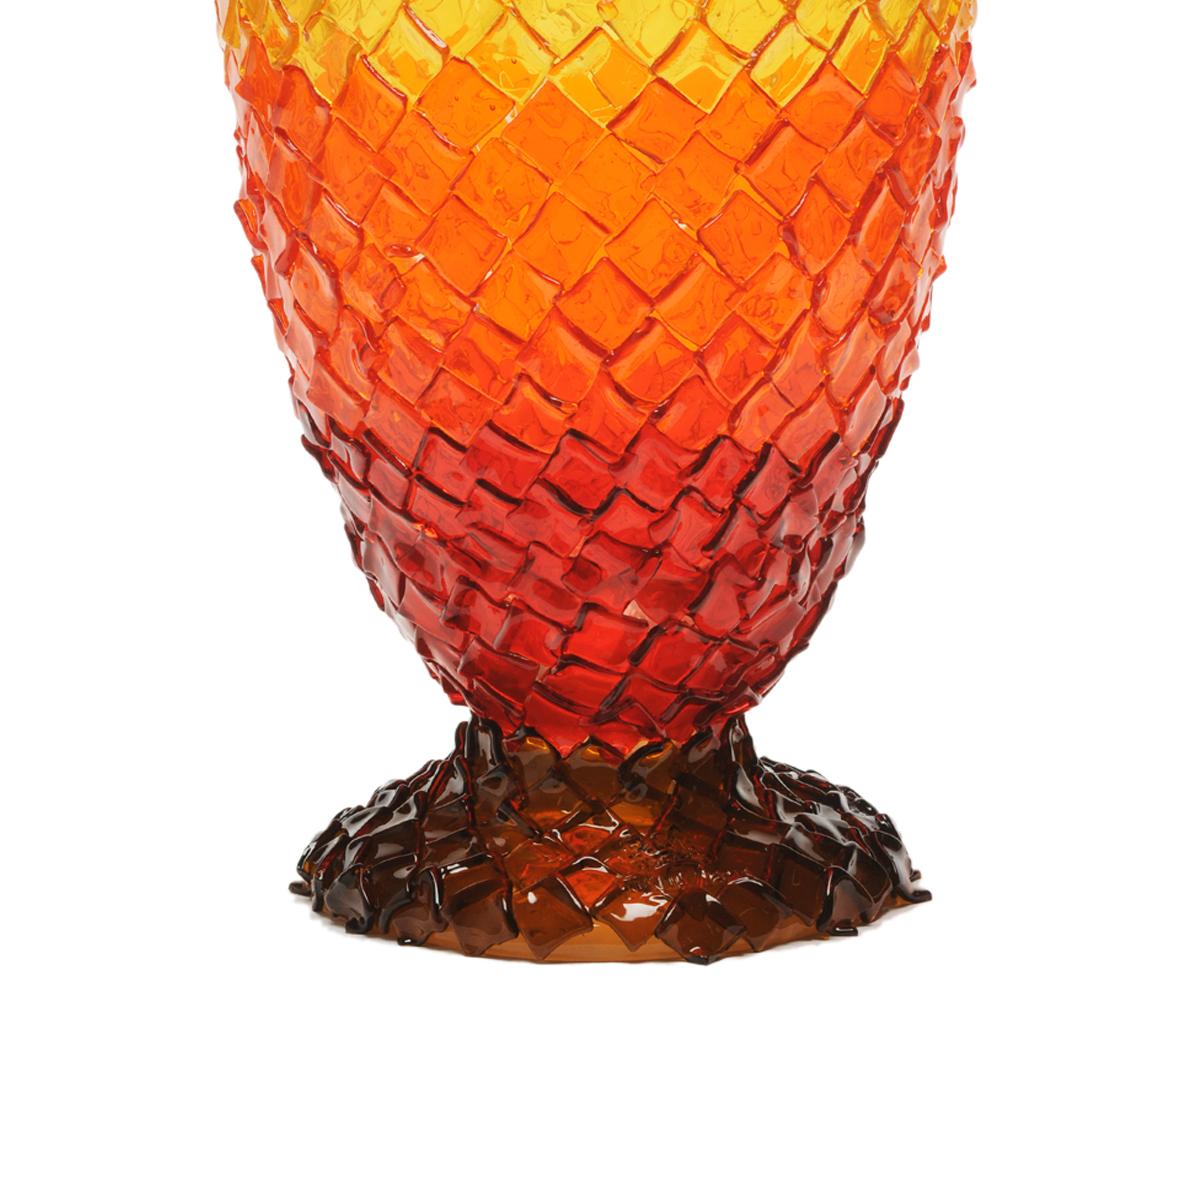 Arts and Crafts Contemporary Gaetano Pesce Rock on Fire L Vase Resin Red Brown Orange Yellow